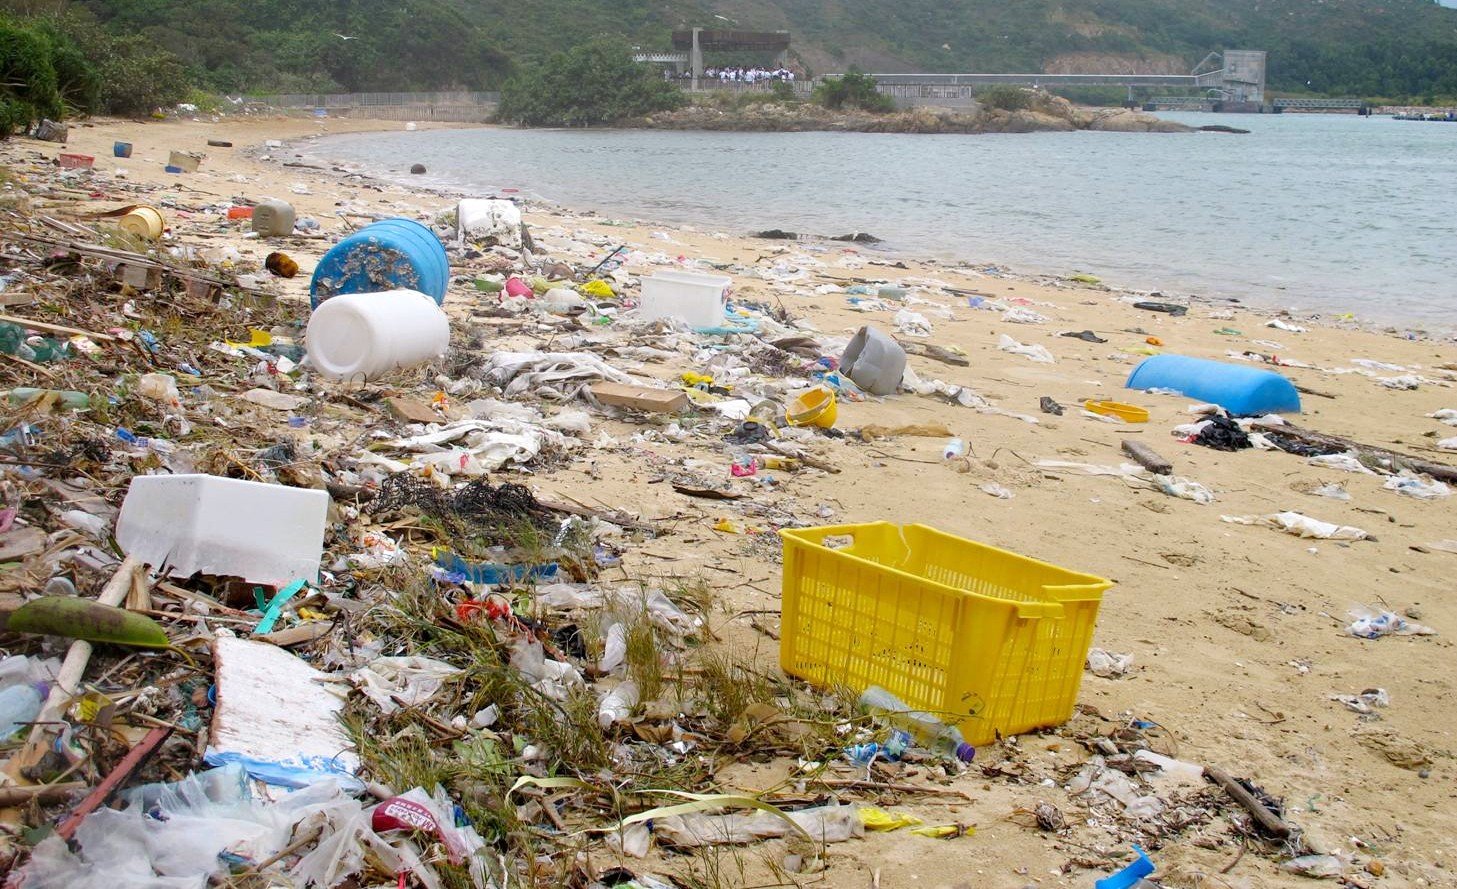 Eco Marine and The Green Race are teaming up for a seven kilometre coastal plog (in which participants pick up litter while jogging) in Hong Kong in August. It’s one example of the opportunities for sustainable volunteering in the city. Photo: SCMP